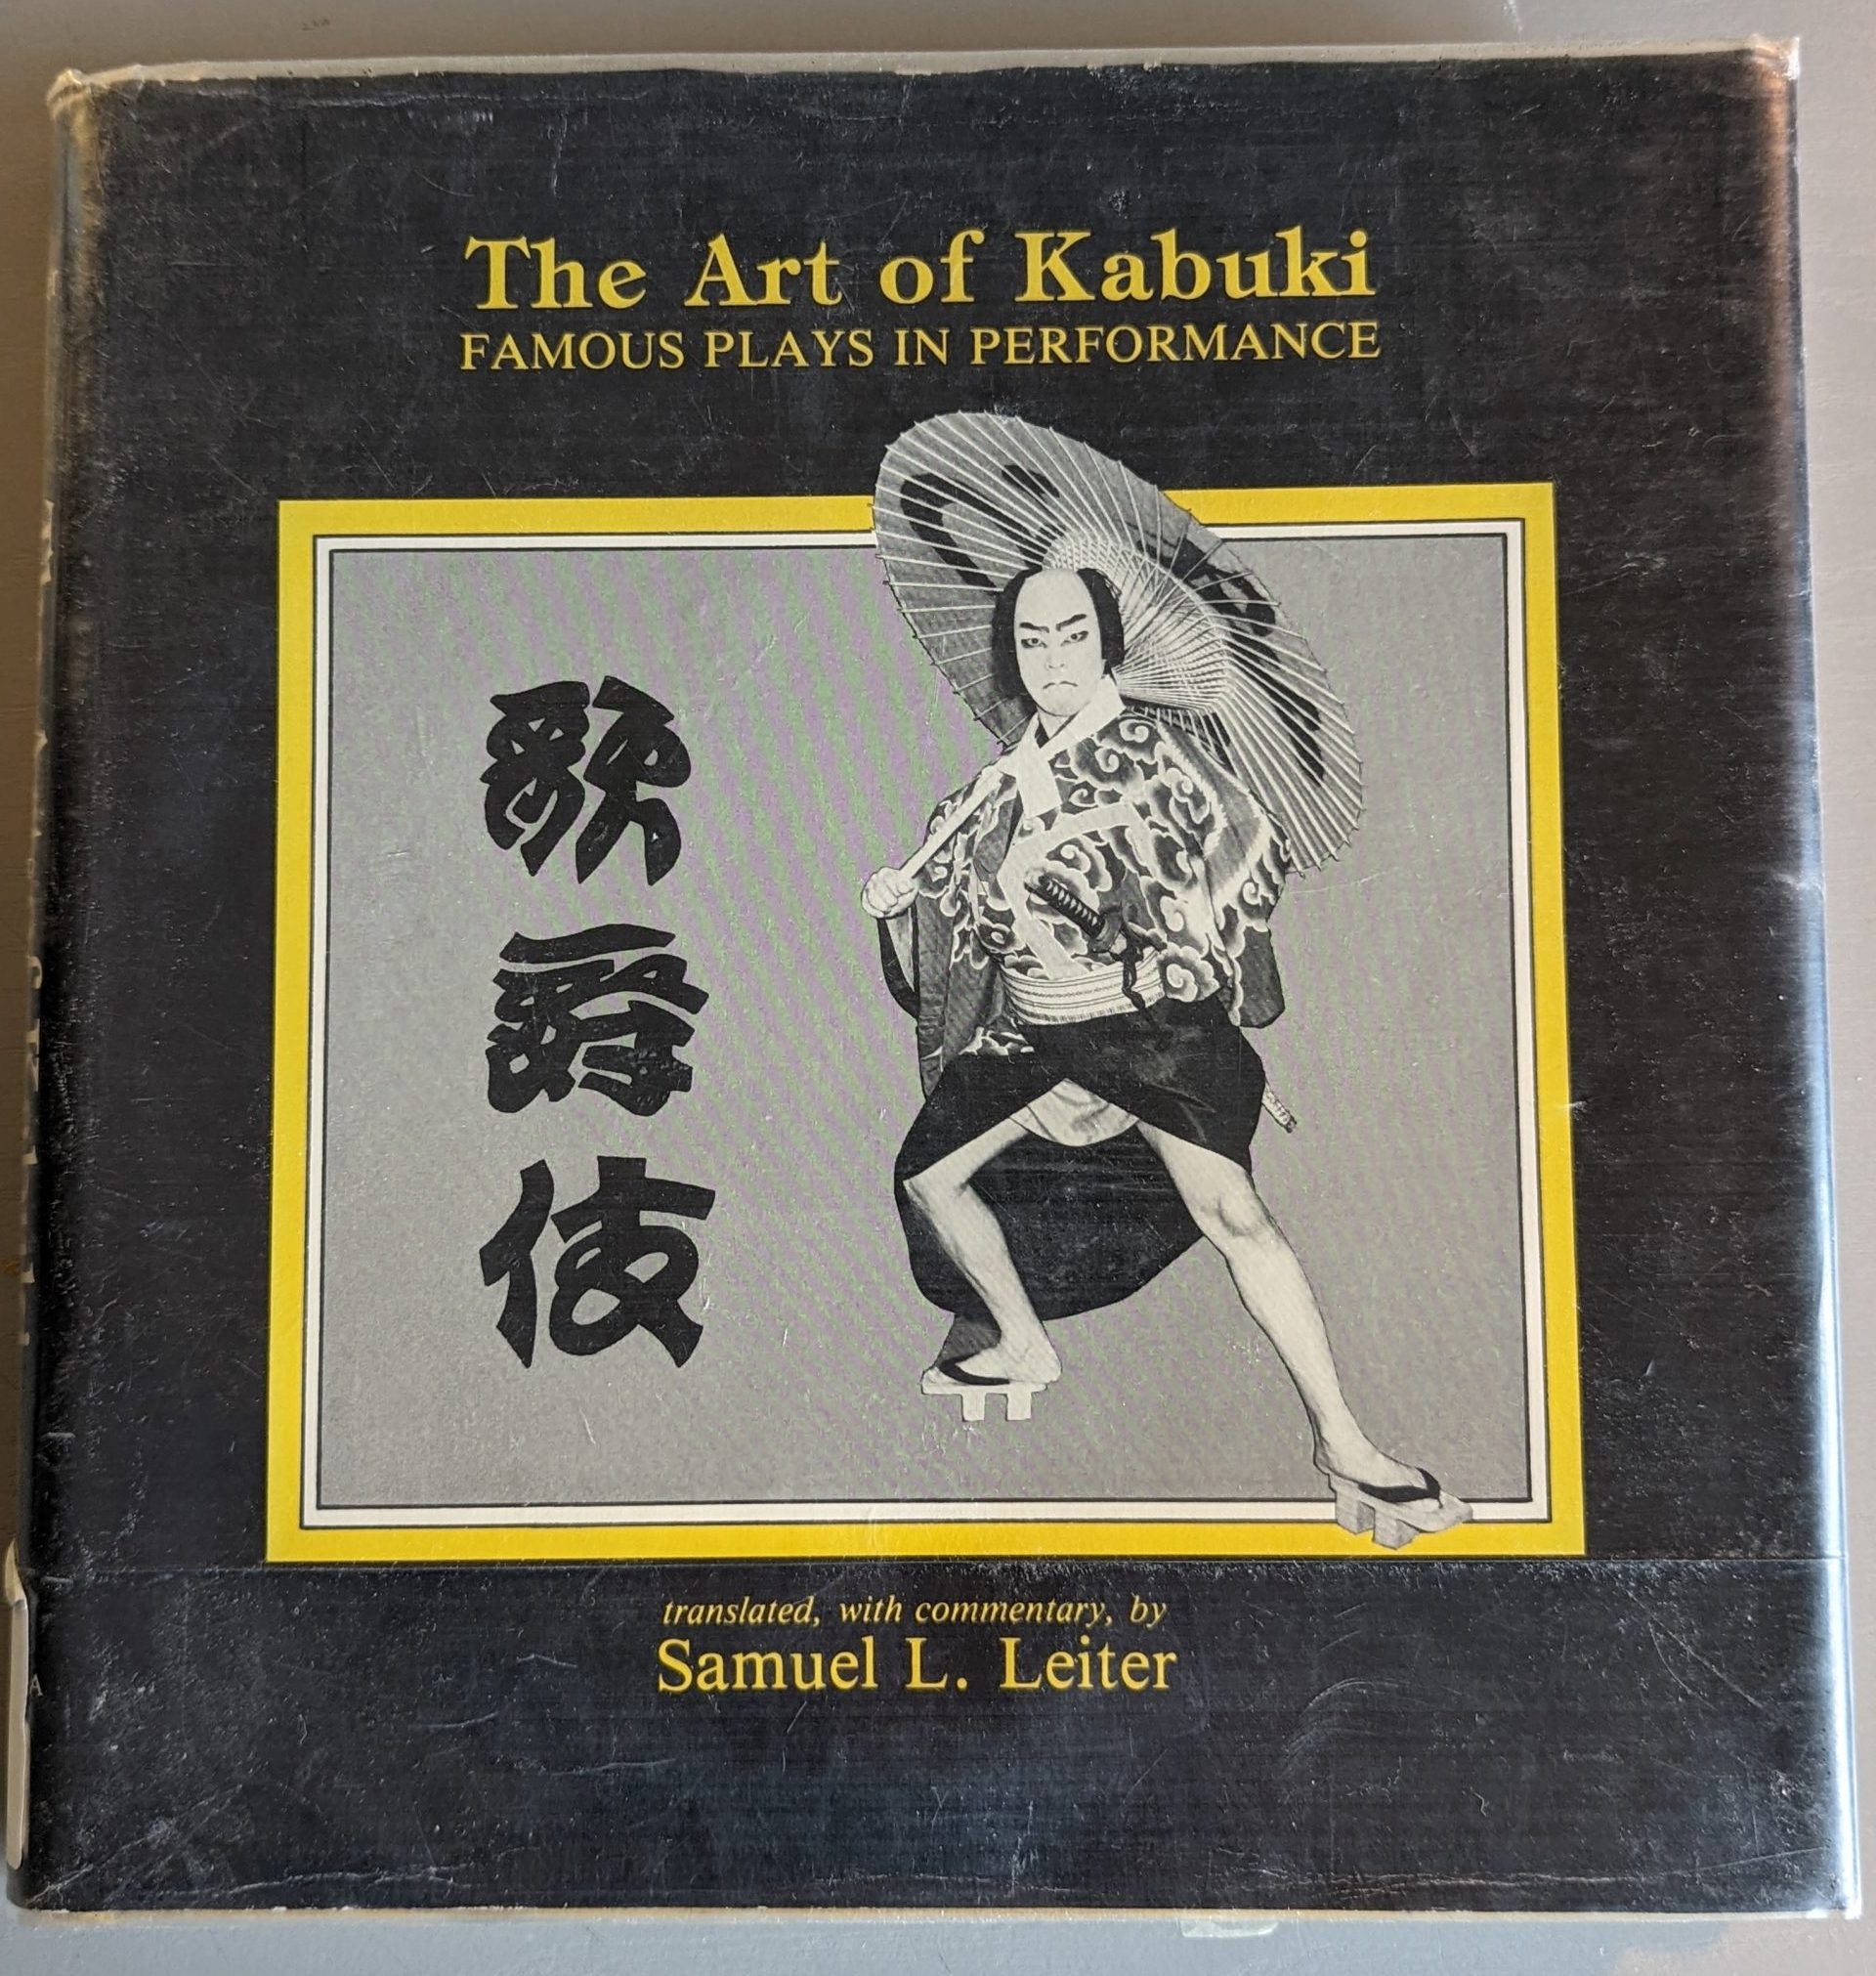 BOOK: The Art of Kabuki – Famous Plays in Performance